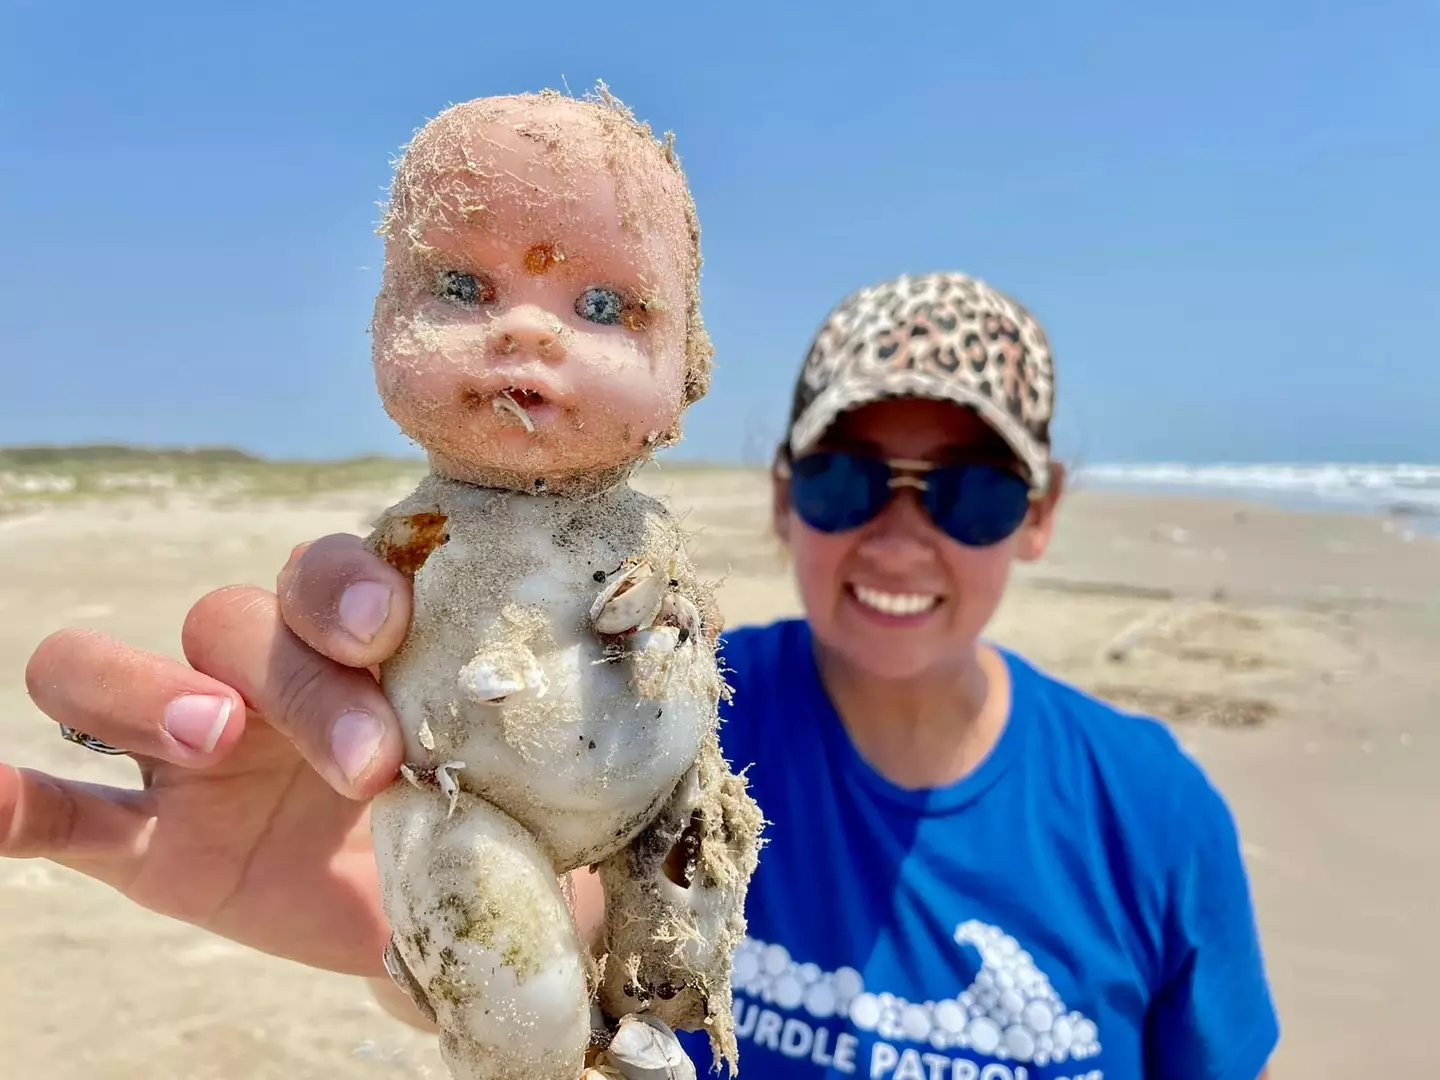 Workers at the reserve have been finding dolls for months.